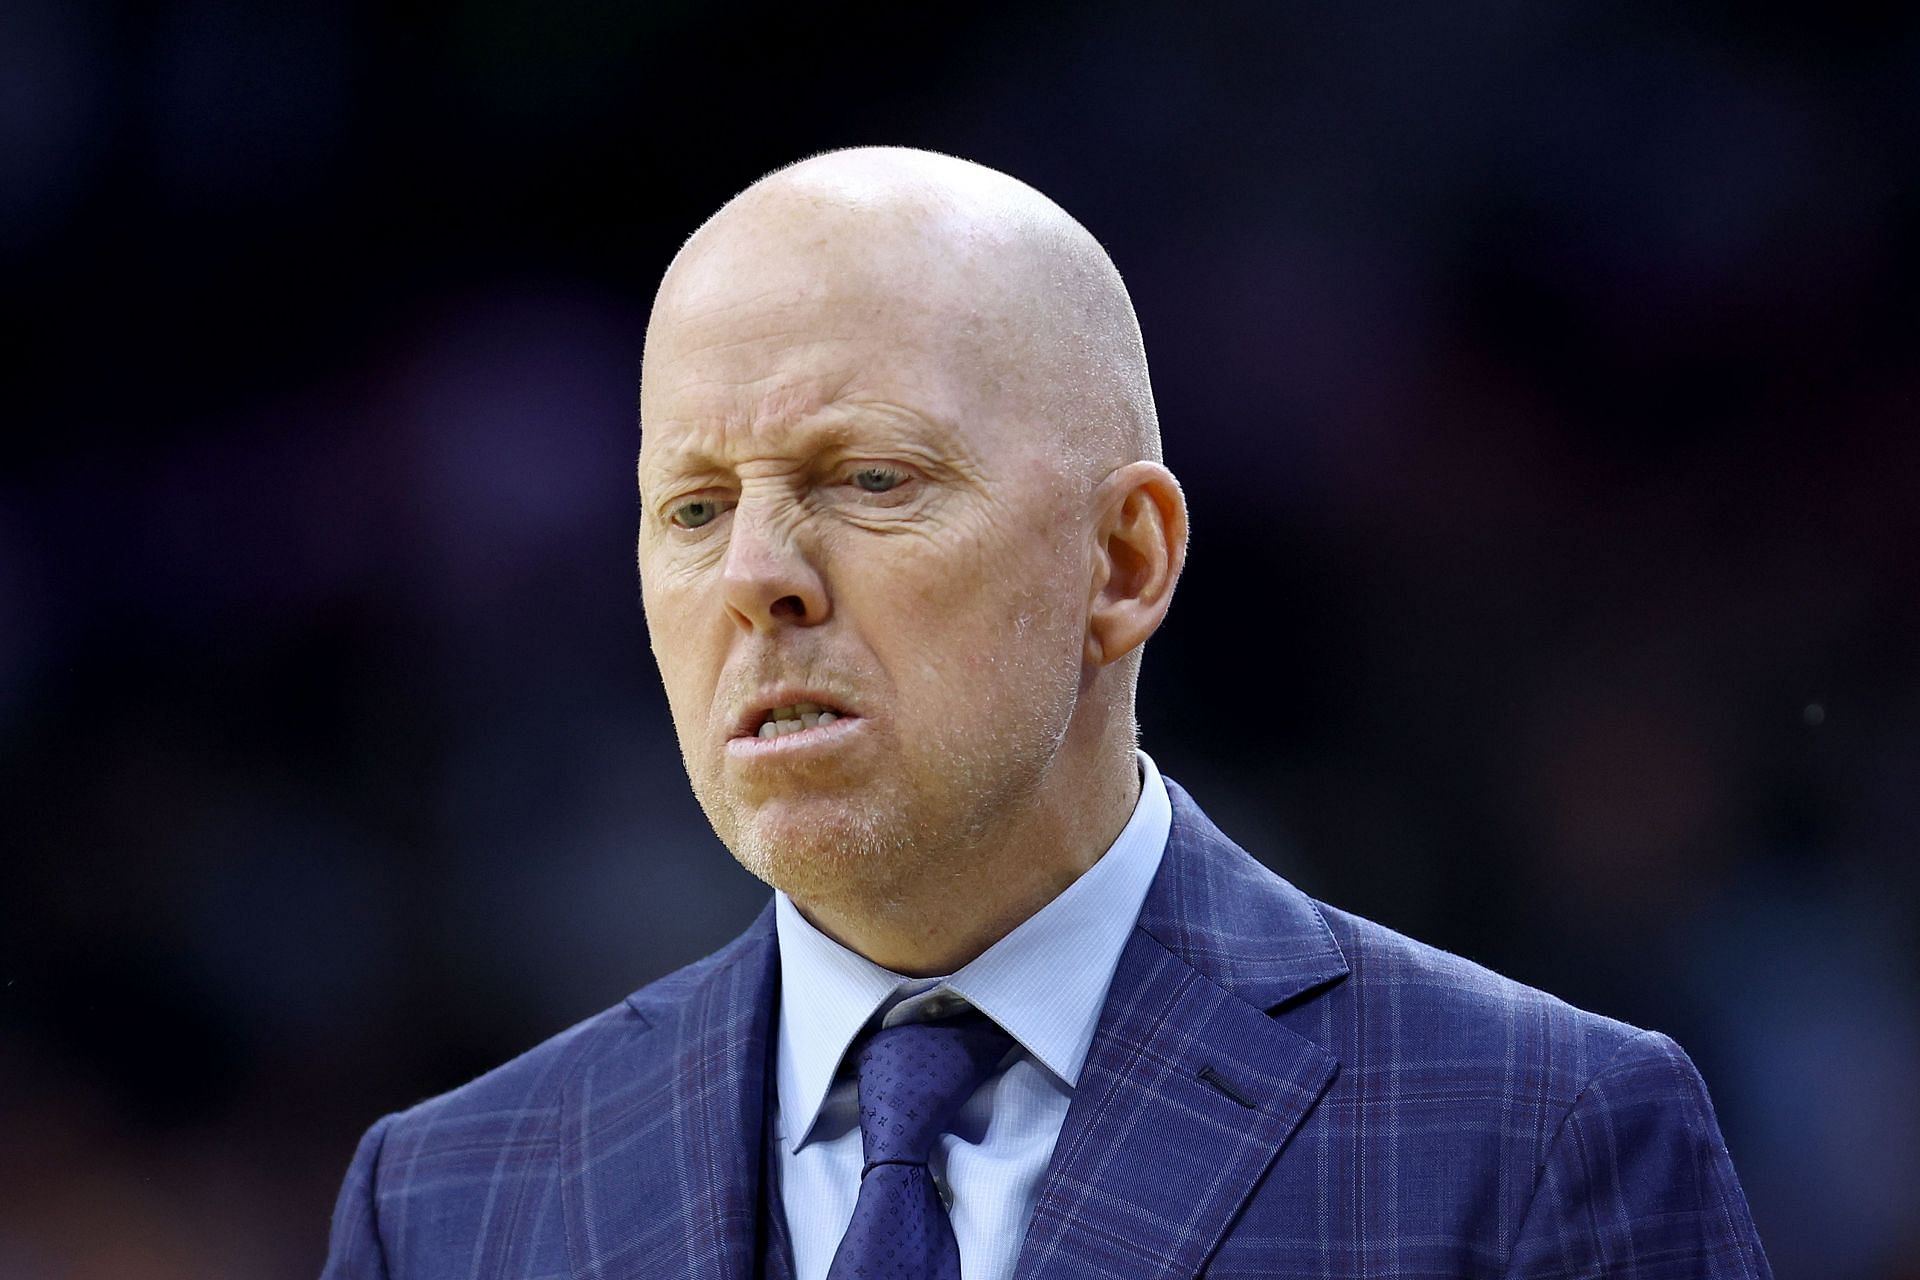 Washington could shake up the conference by nabbing Mick Cronin from UCLA.